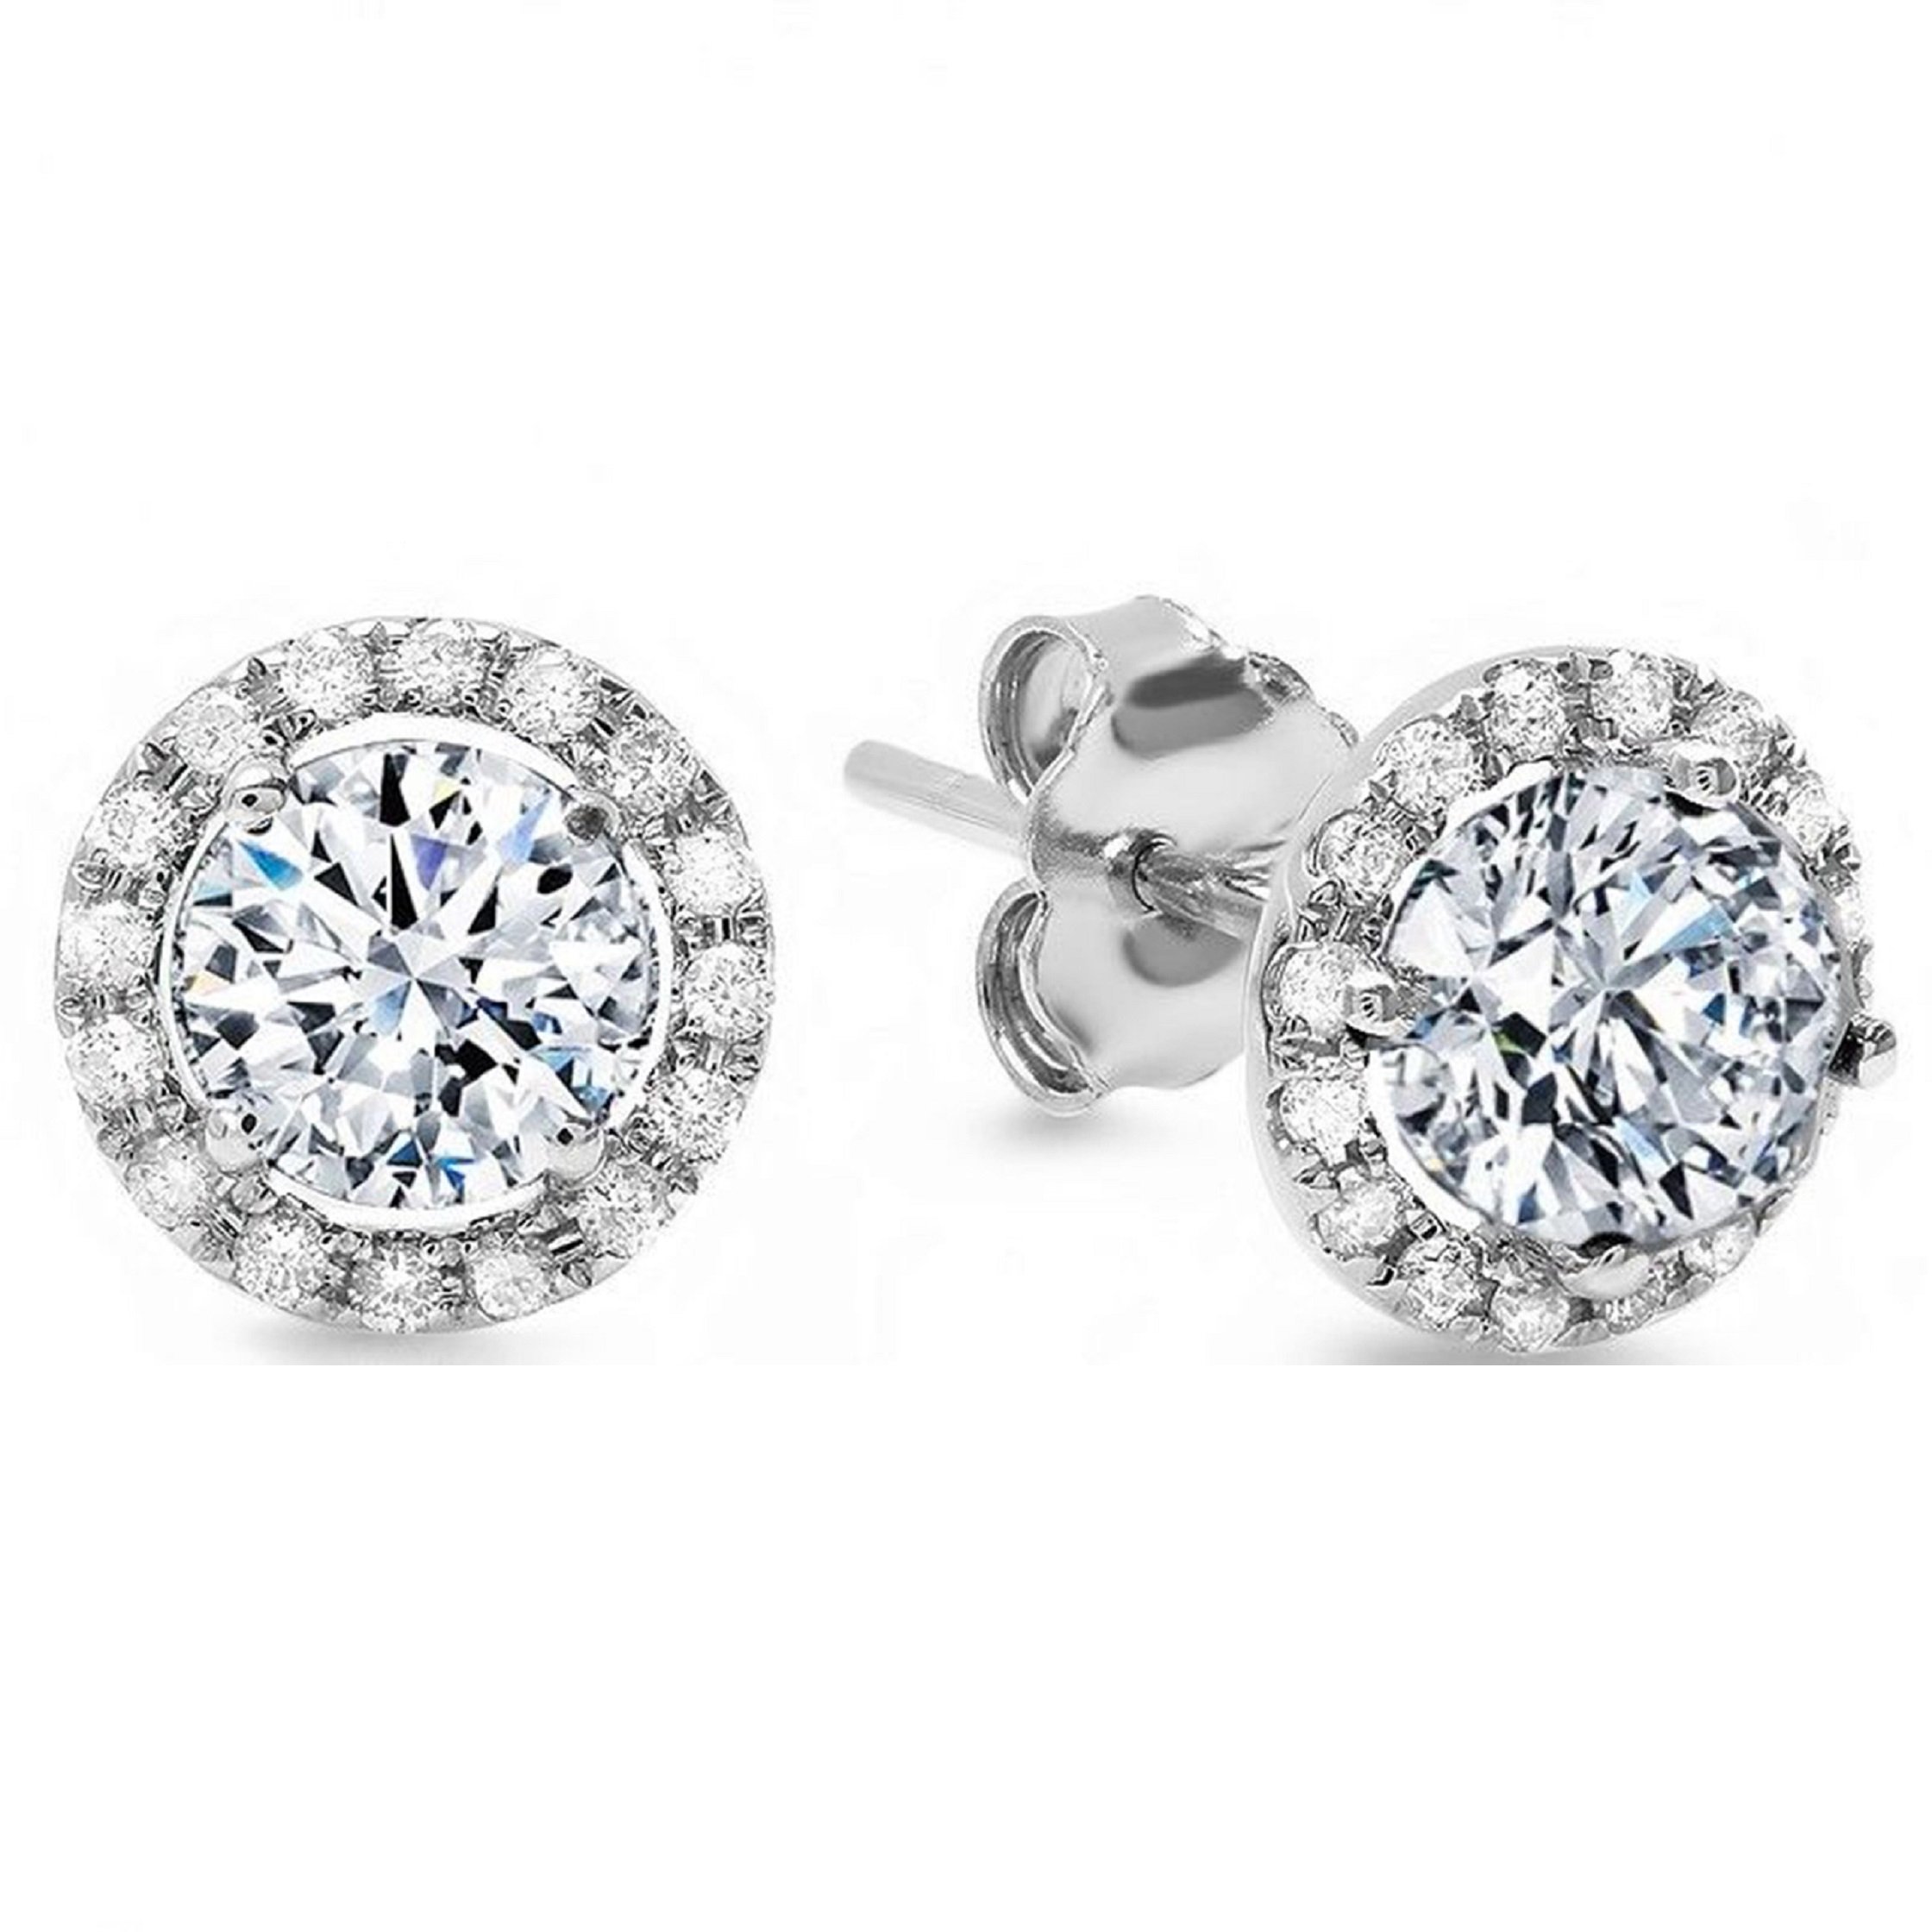 1.54cttw Round Cut ideal VVS1 Conflict Free Gemstone Halo Solitaire Genuine Moissanite Unisex Designer Solitaire Stud Screw Back Earrings Solid 14k White Gold